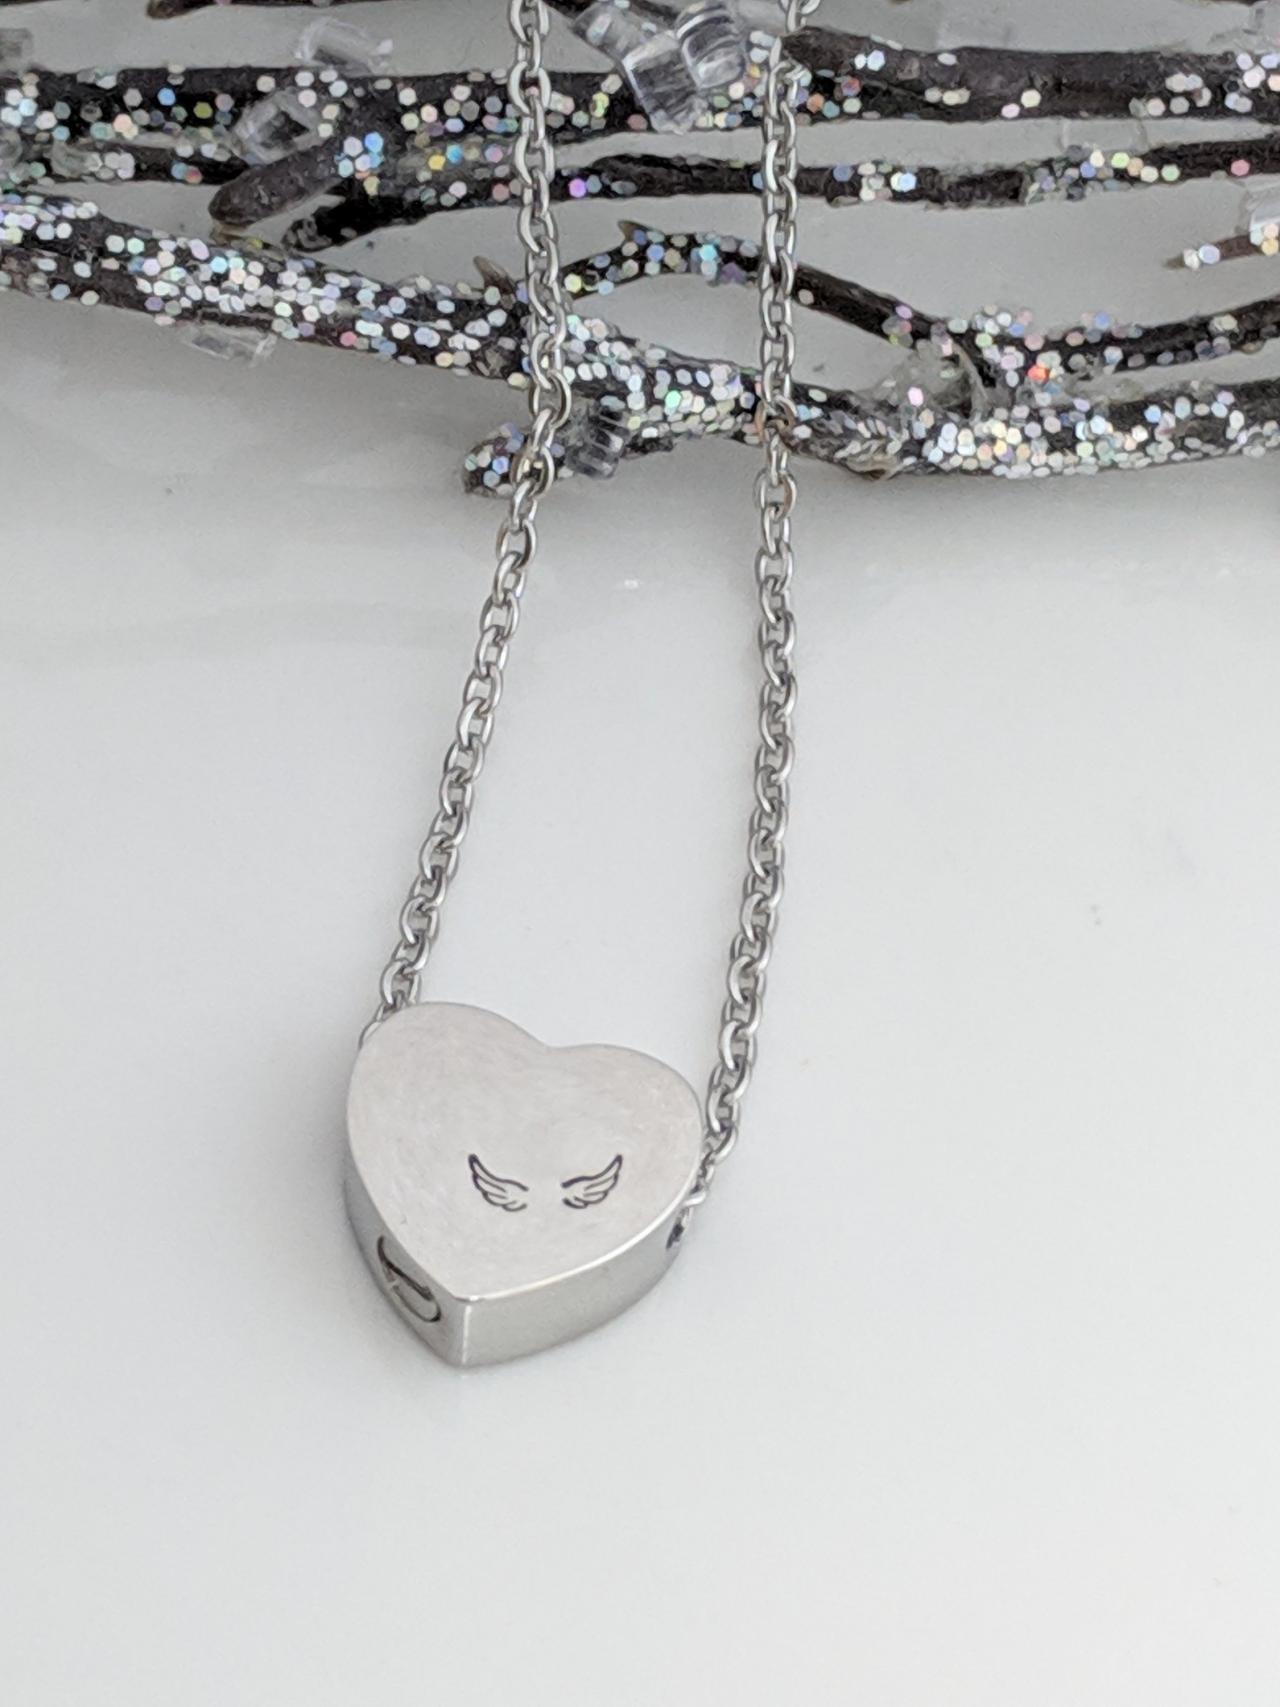 Hand Stamped Silver Heart Necklace - Heart Urn - Angel Wings - Cremation Jewelry - Ashes Necklace - Urn For Ashes - Remembrance - Keepsake -